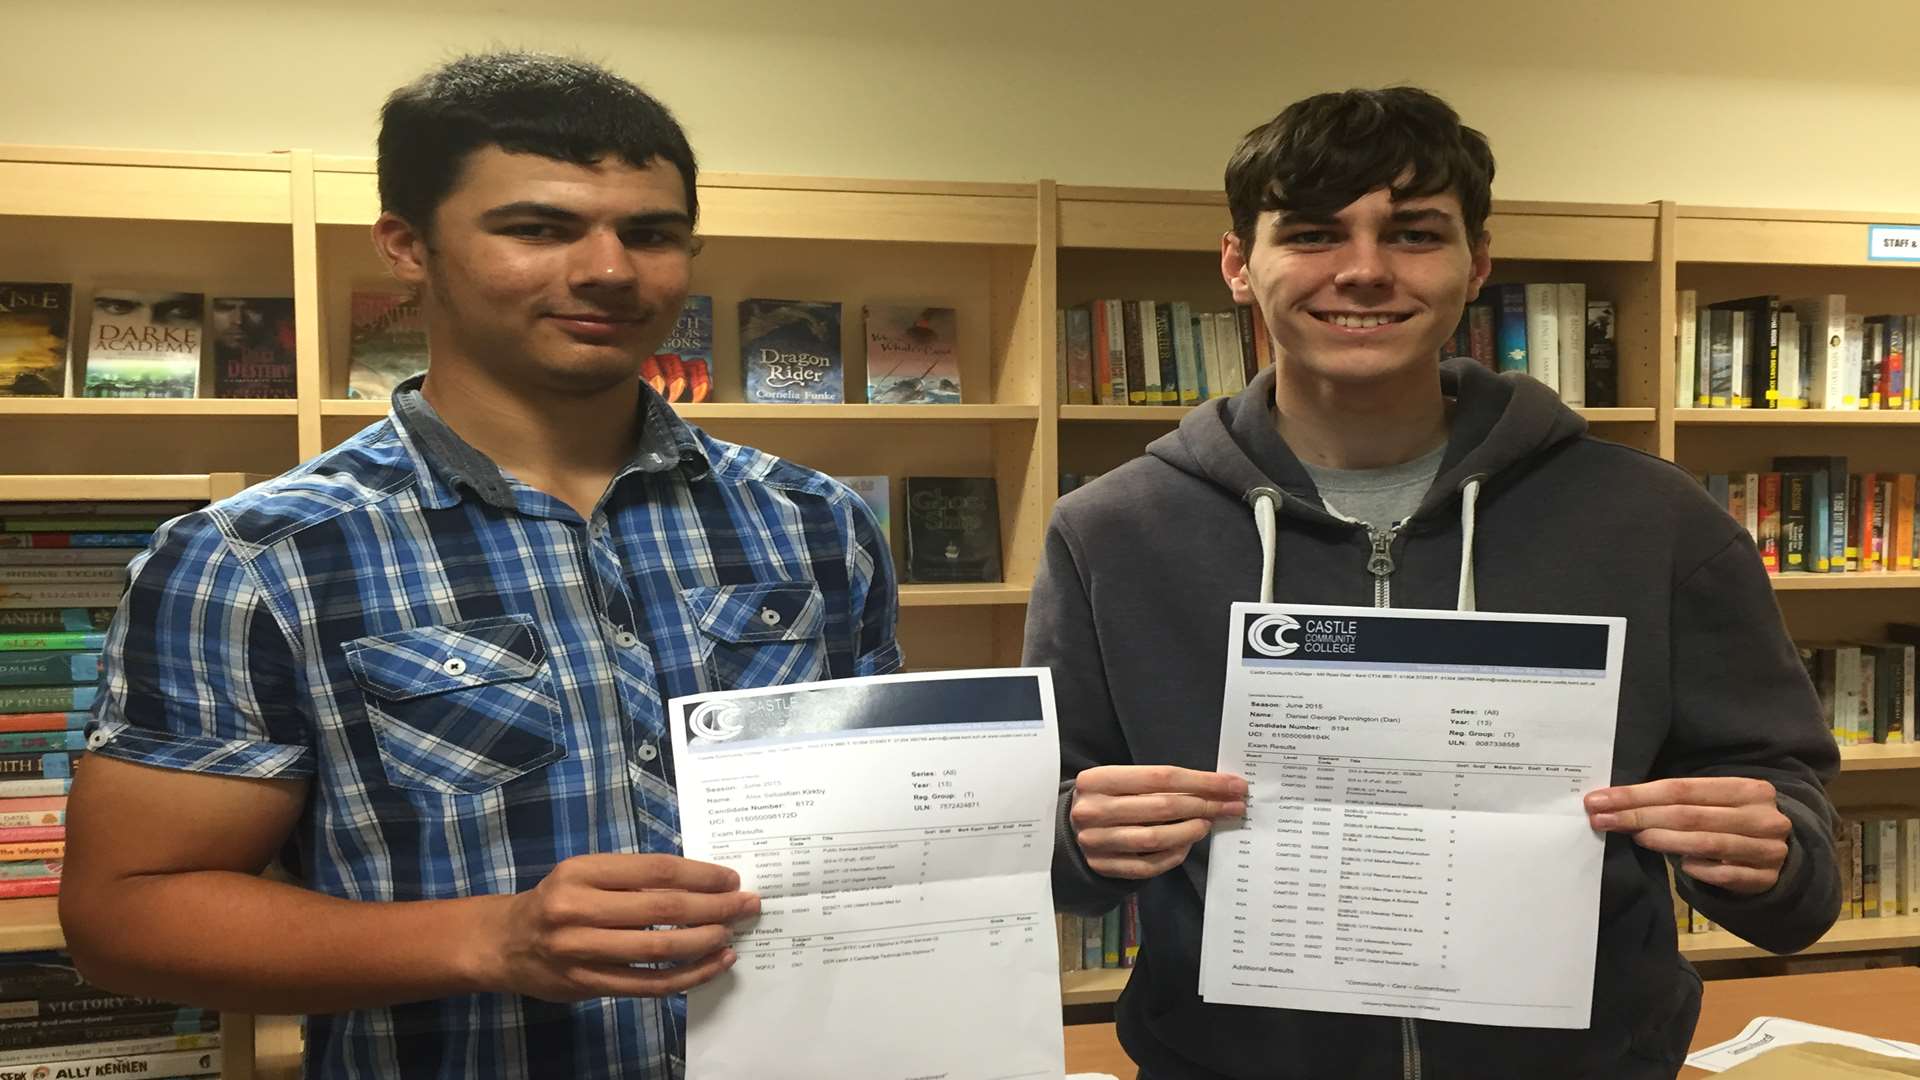 Dan Pennington and Alex Kirkby were happy with their results